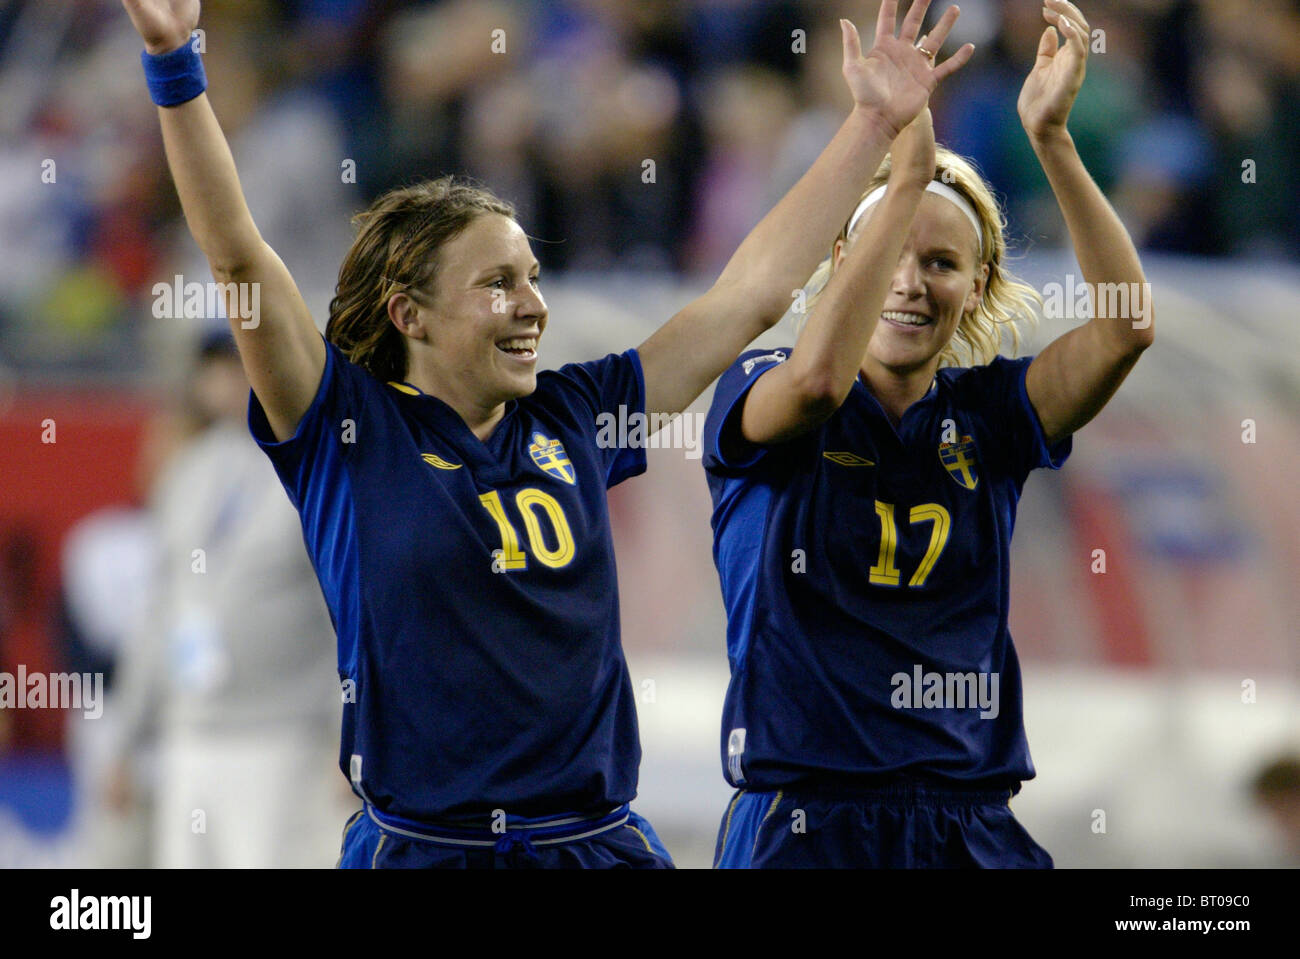 Sweden players Hanna Ljungberg (10) and Anna Sjoestrom (17) celebrate after their victory over Brazil in 2003 Women's World Cup. Stock Photo